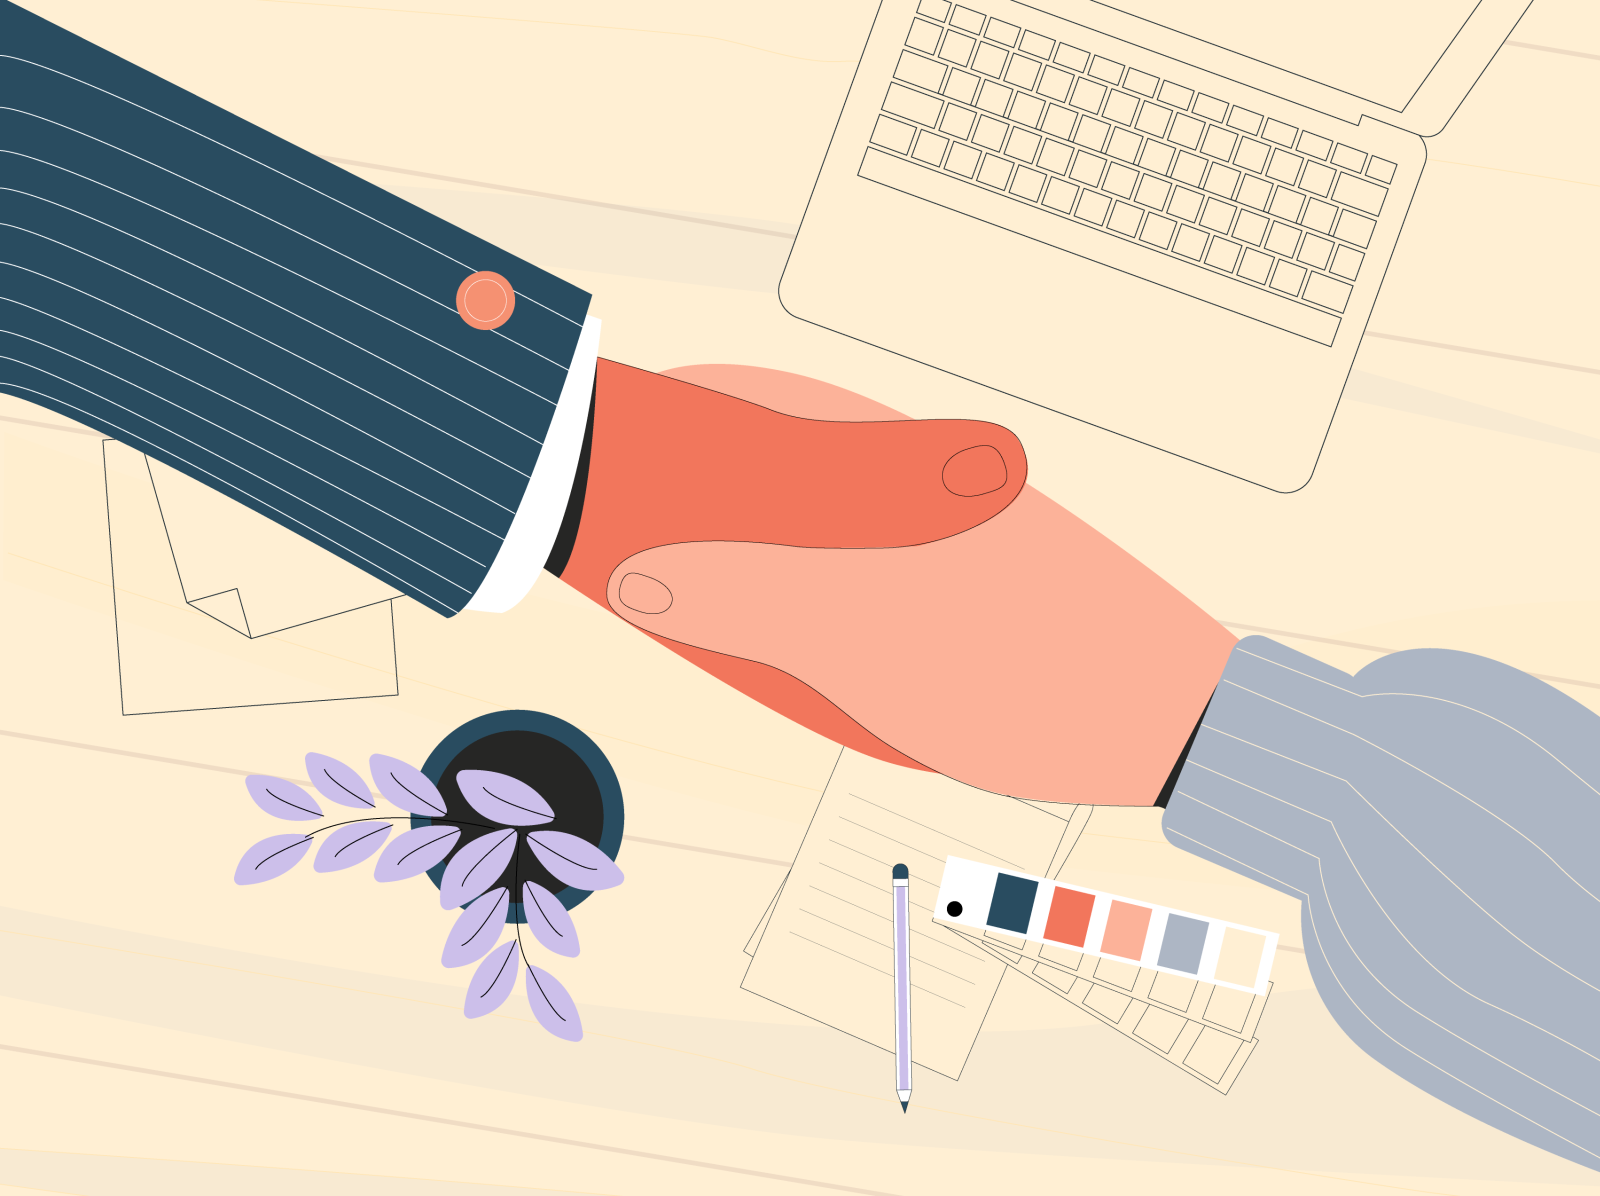 Illustration of a freelance graphic designer shaking hands with a client. 